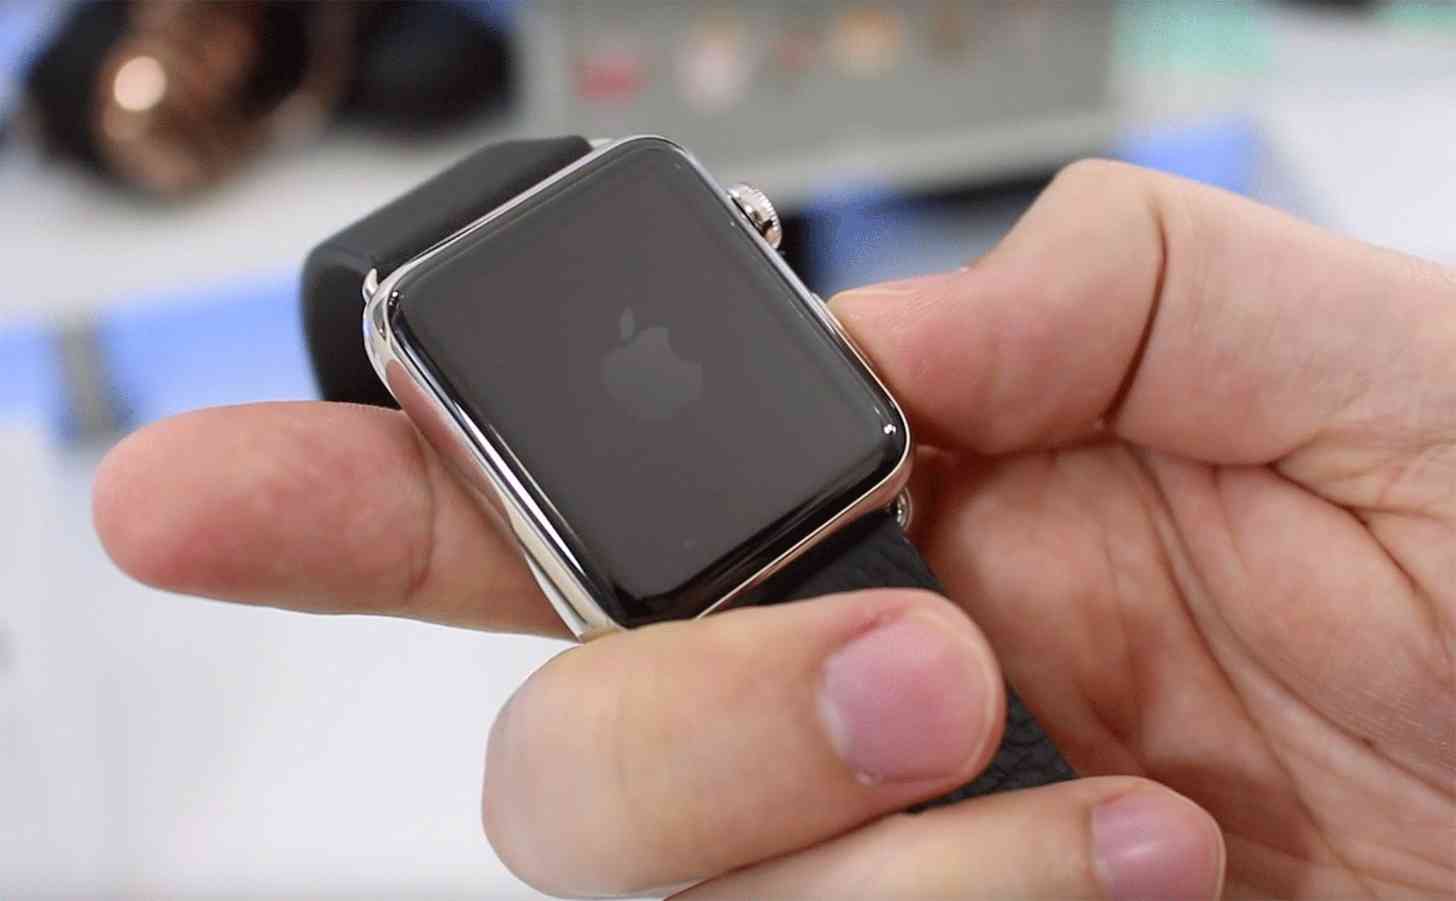 Apple Watch stainless steel hands-on